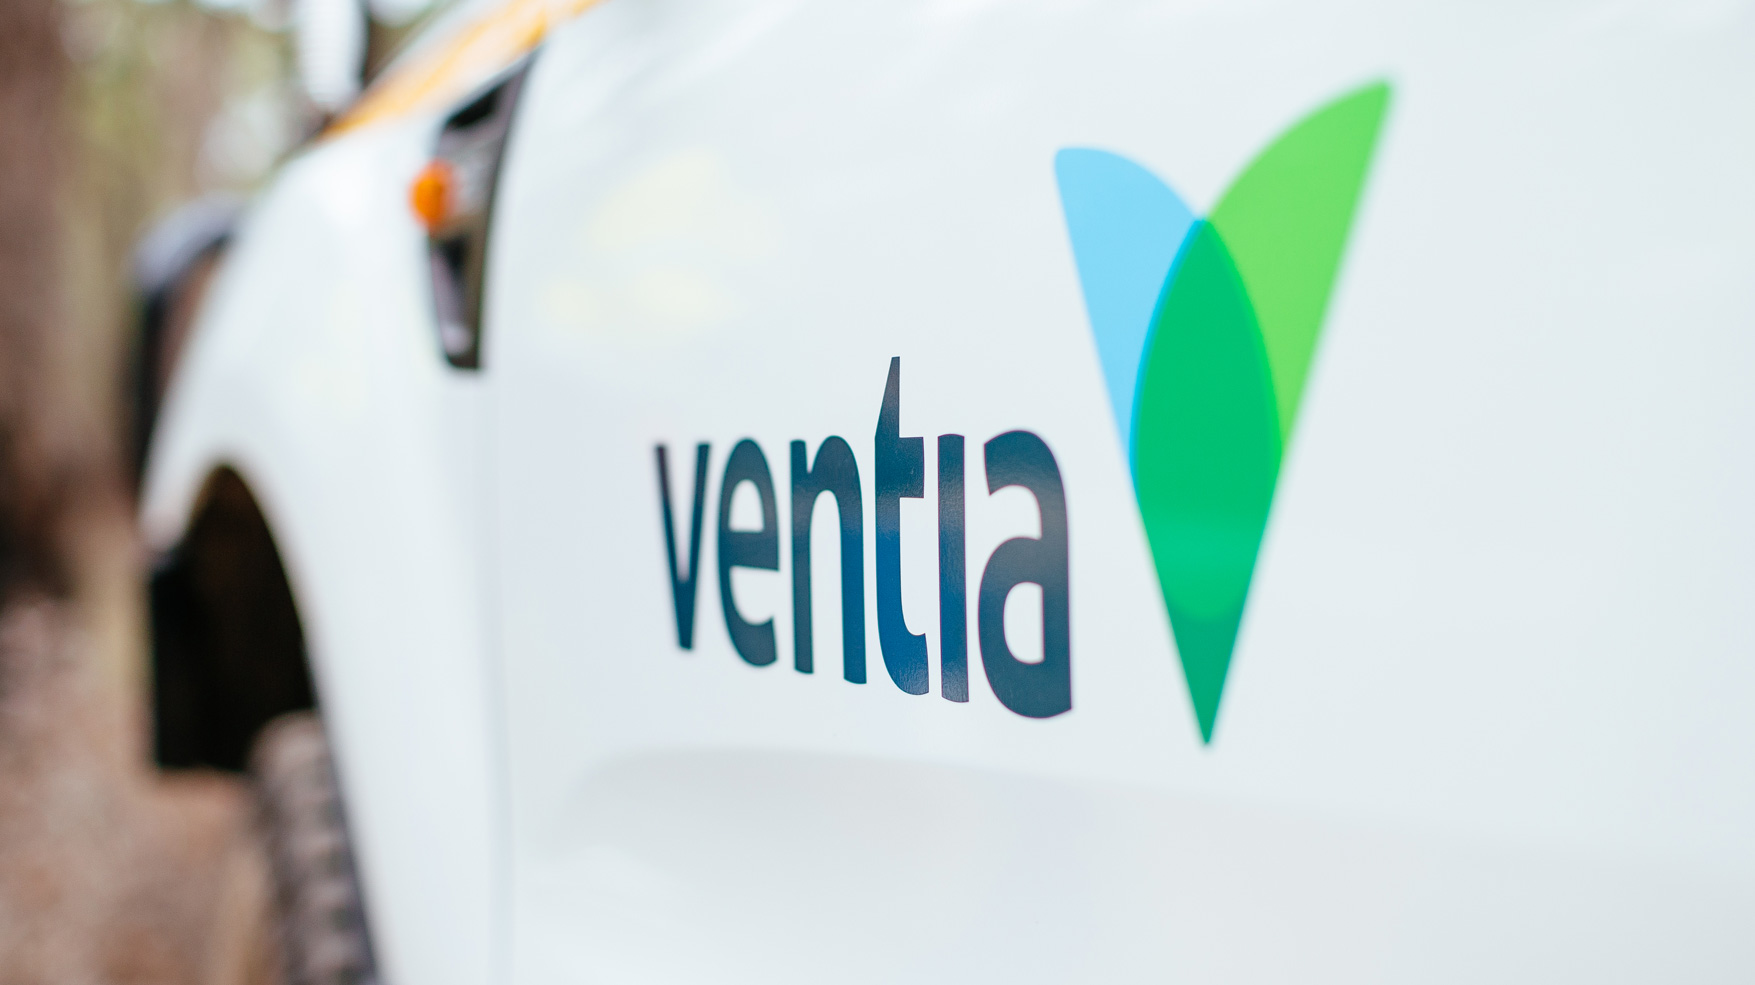 Ventia appoints new cyber security GM